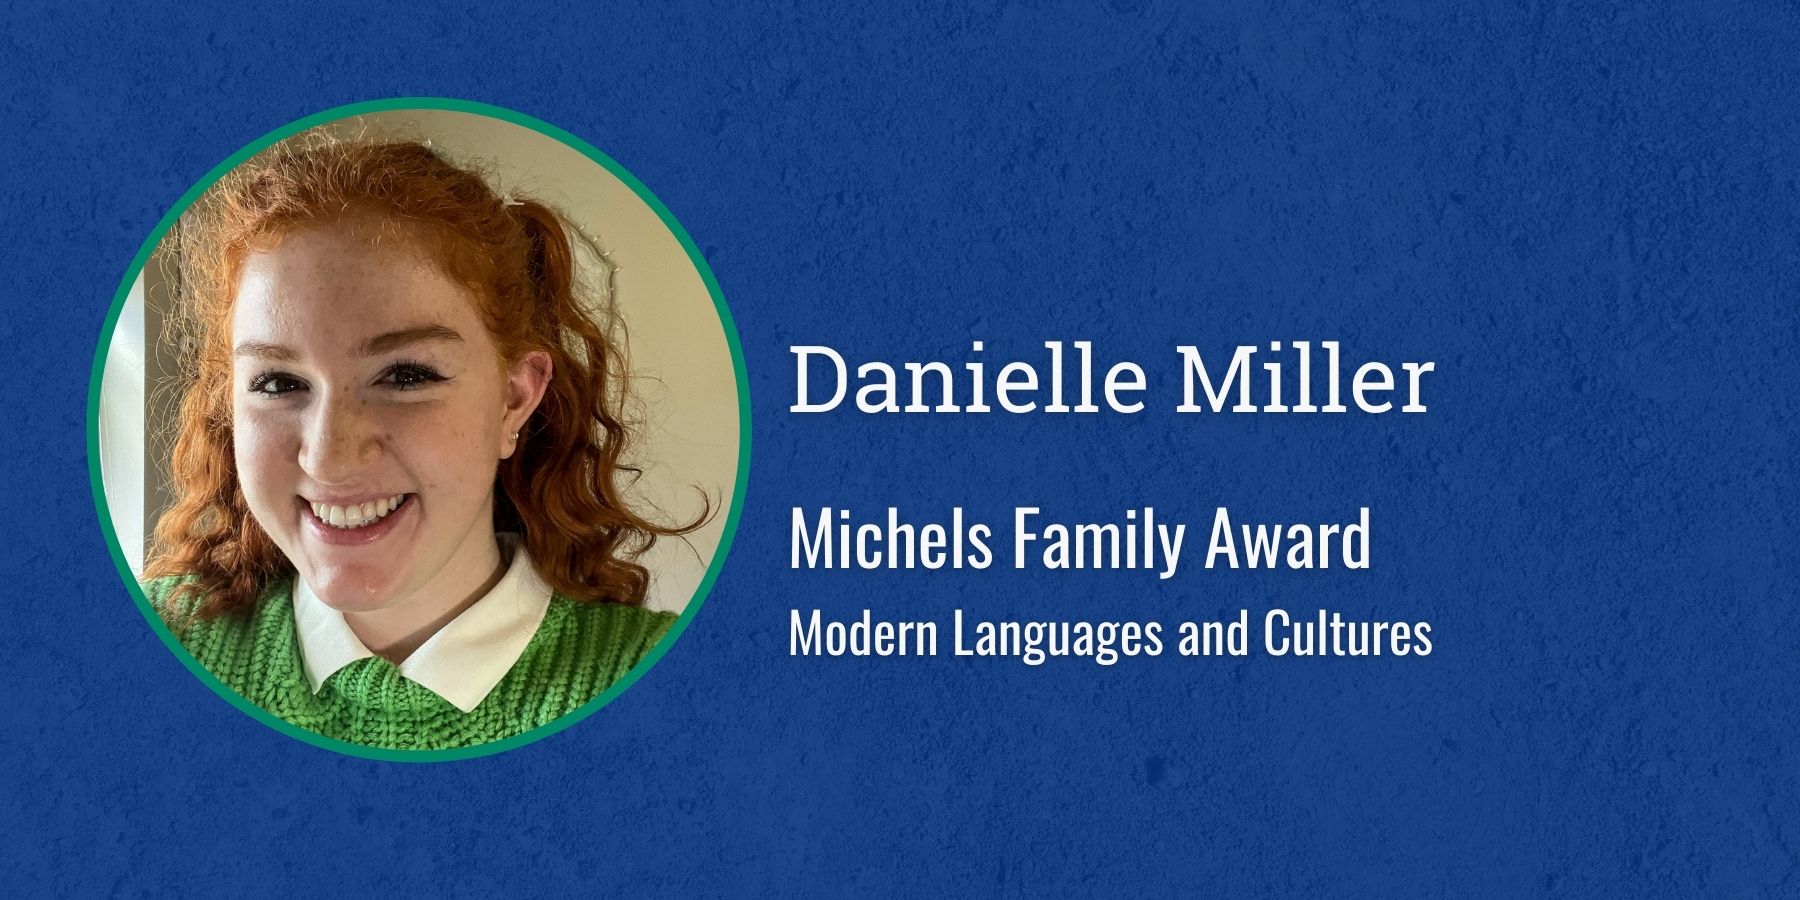 photo of Danielle Miller and text